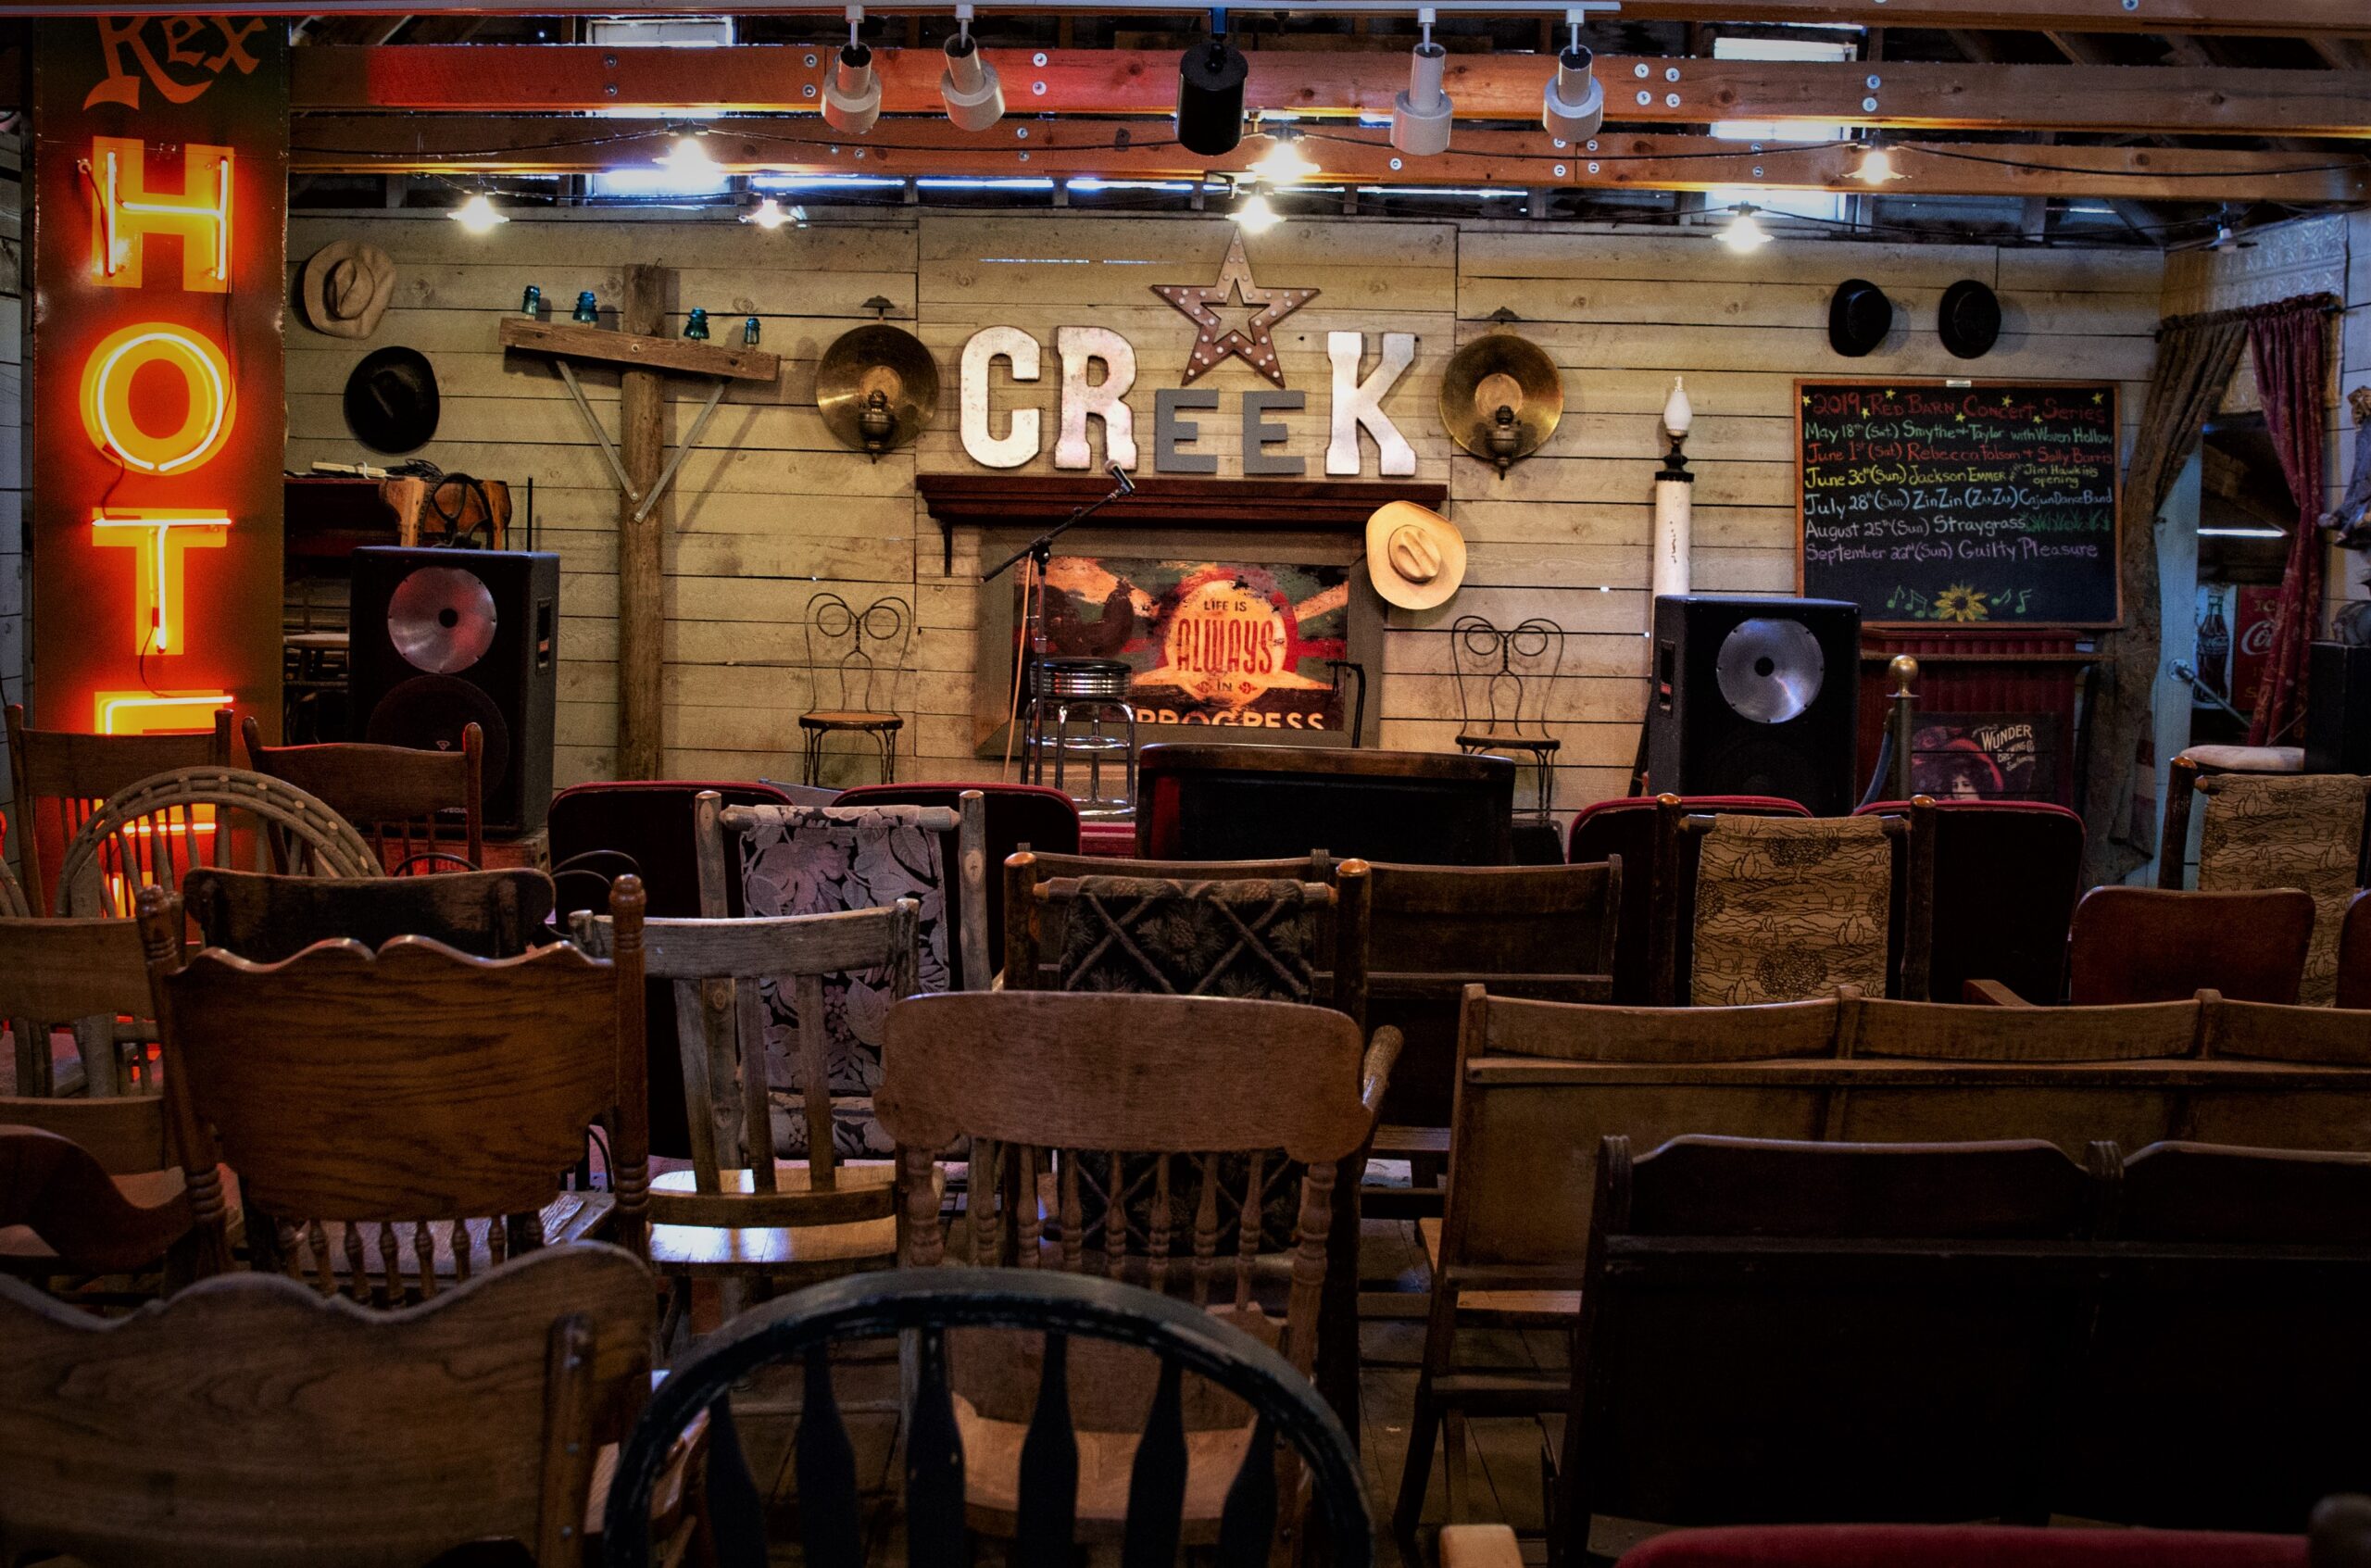 A photo of the inside of the Four Mile Creek concert venue.